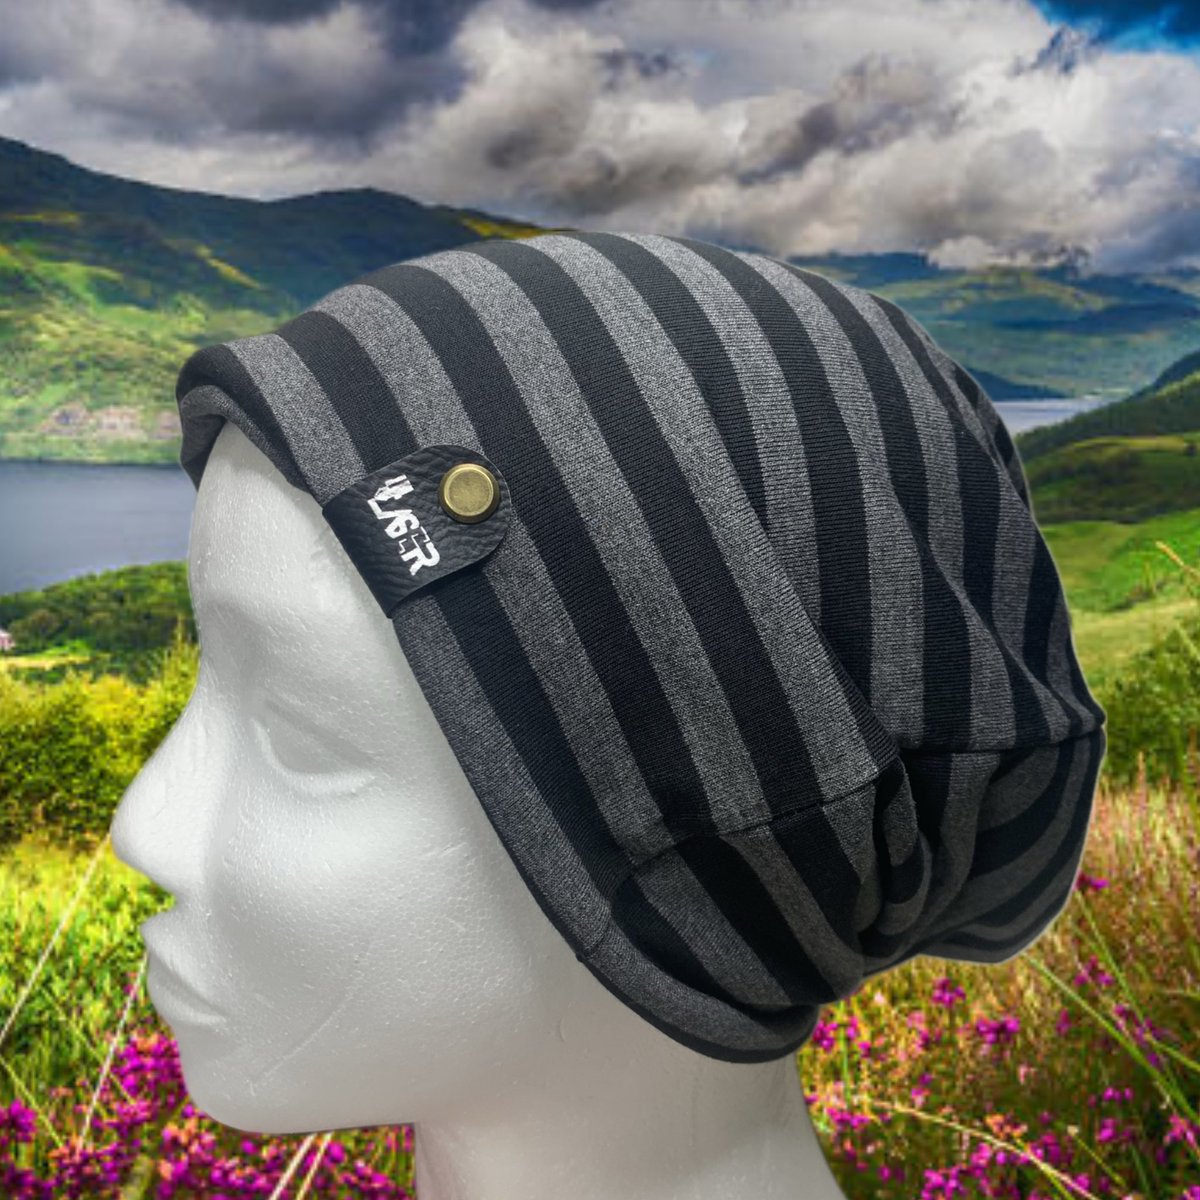 #etsyshop #Slouchy #beanie #Personalised #Initials #Beaniehat #Stripedhat #Black #Grey #Matching #clothing #Jersey #hat #Matchinghats etsy.me/3UiaLkf #slouchyhats #beaniehats #stripehats #chemohats #snood #slouchybeanie #handmadehats #unisexhats #stretchyhats